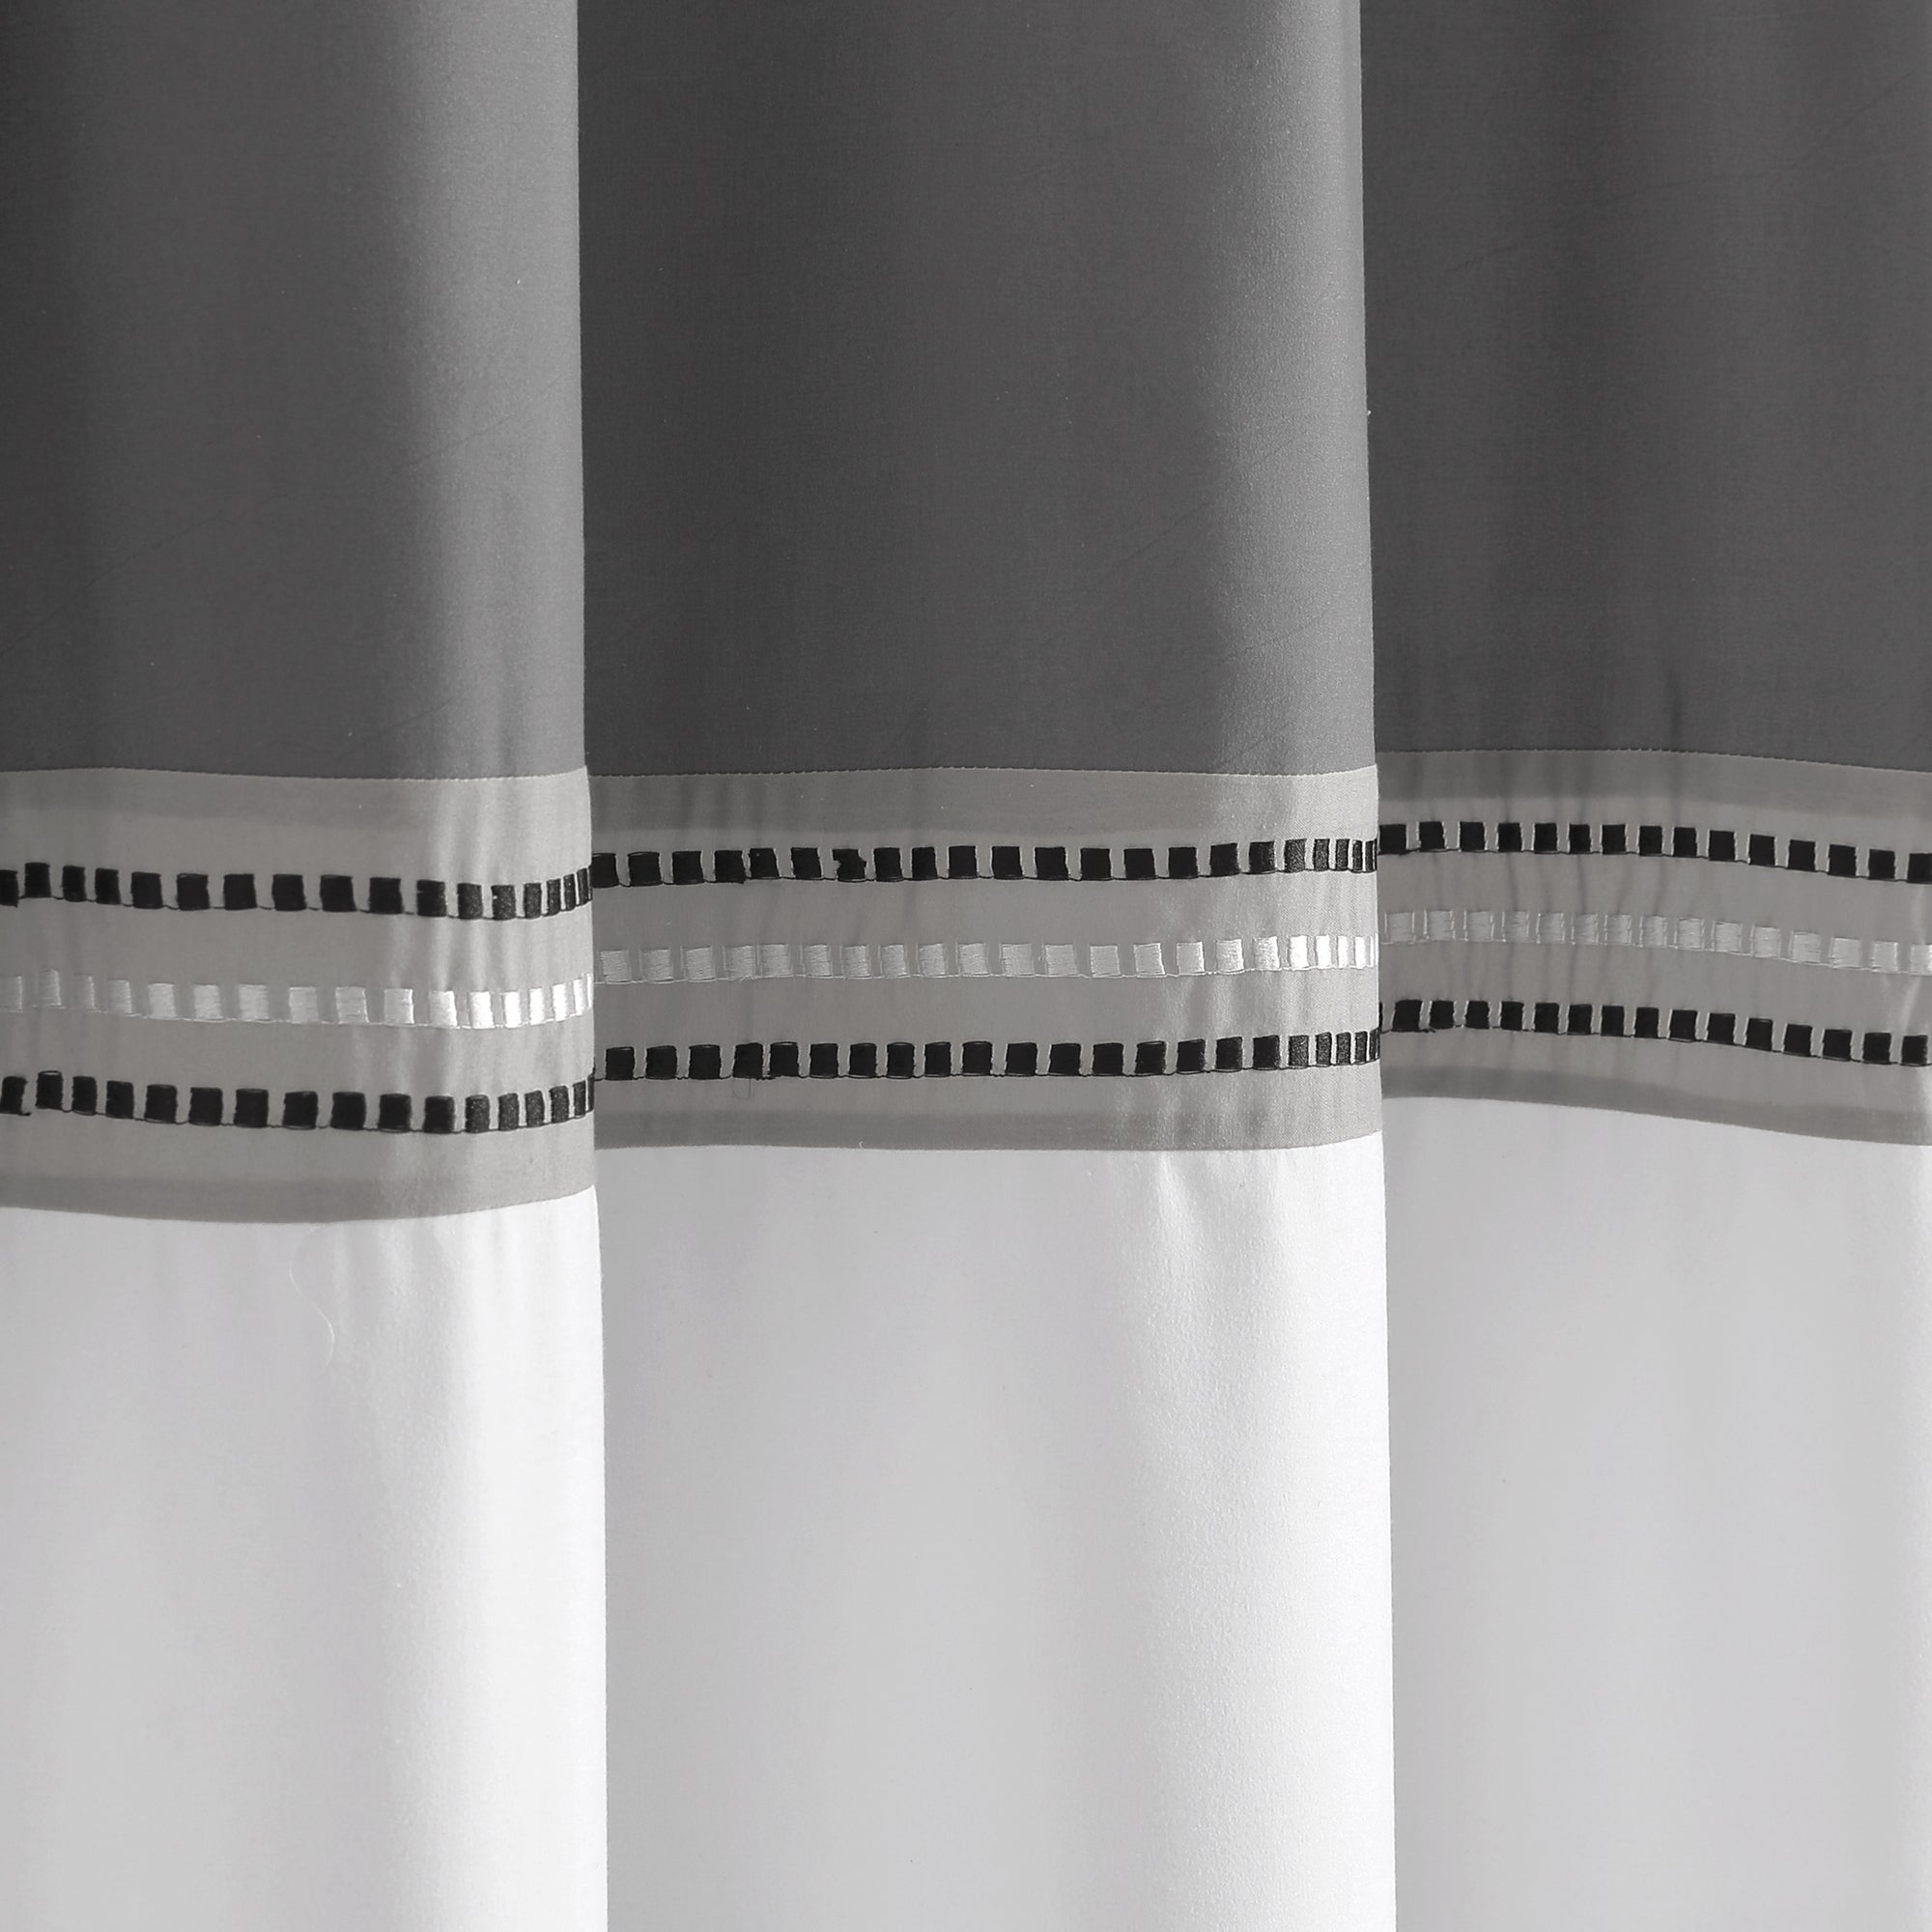 Terra Embroidery Shower Curtain